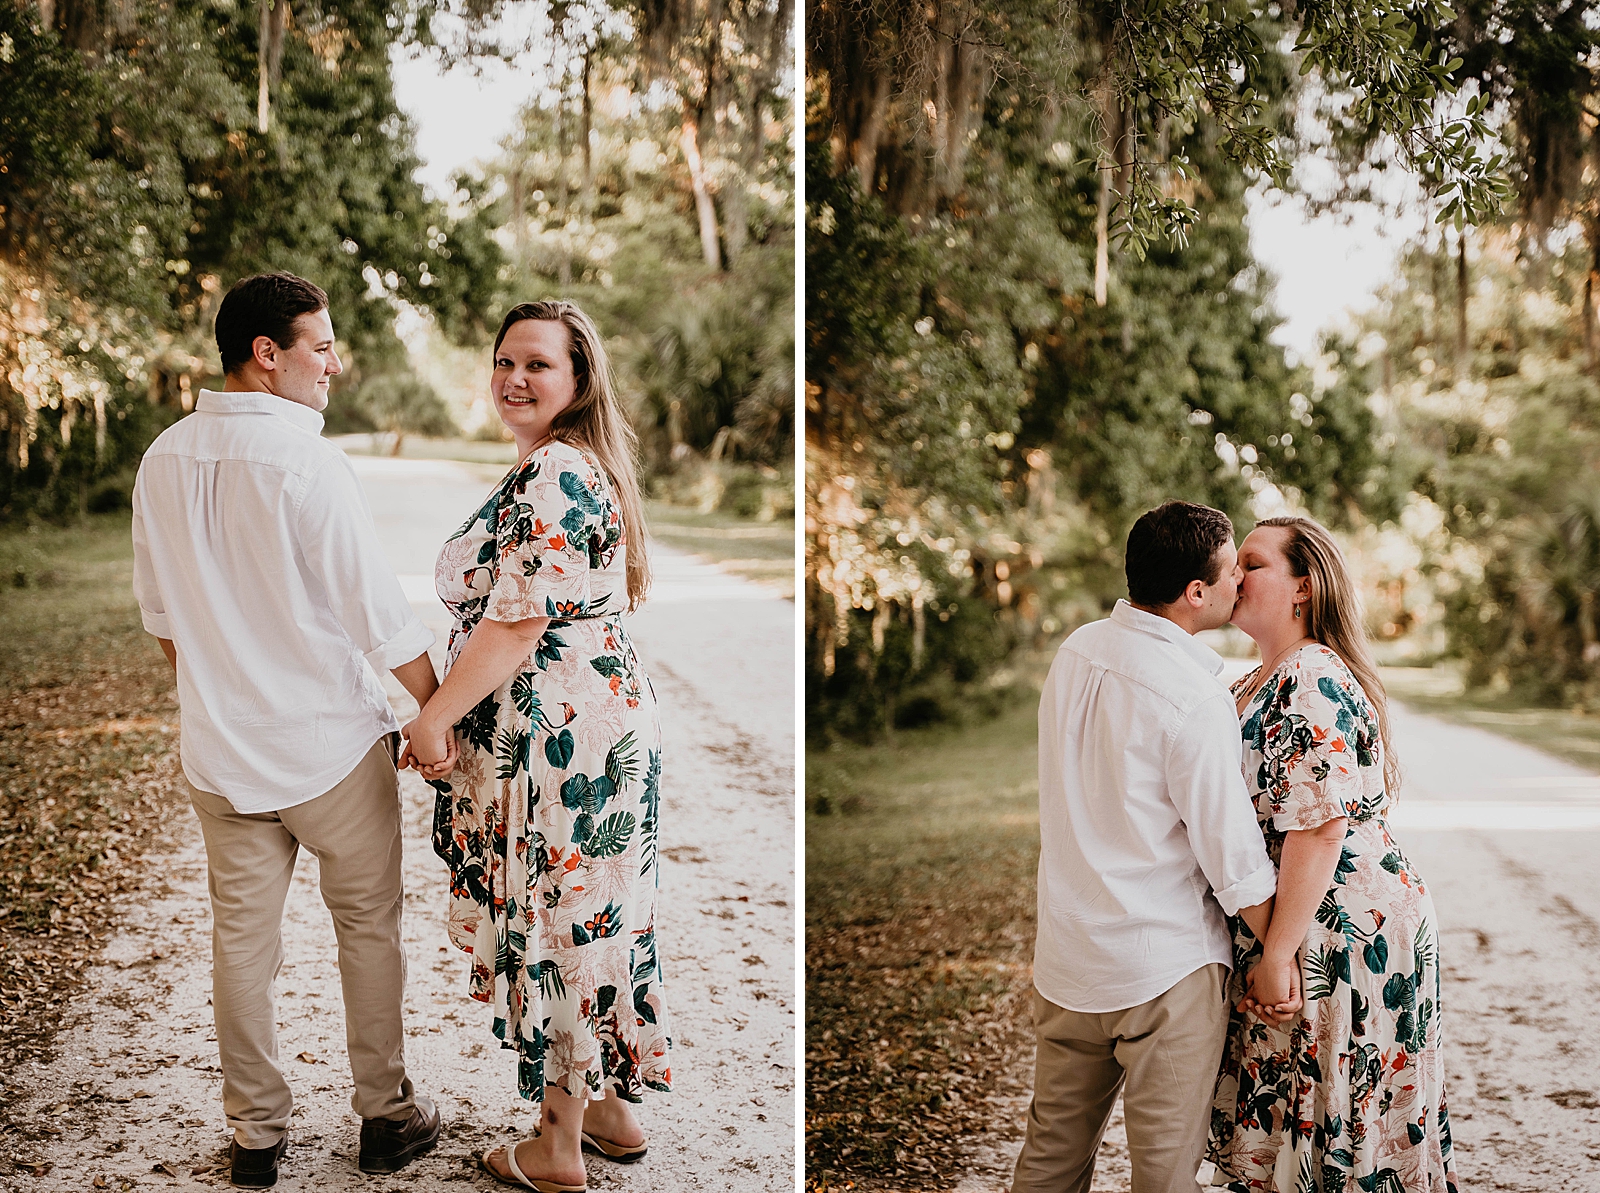 Couple holding hands and kissing strolling on dirt road Riverbend Park Engagement Photography captured by South Florida Engagement Photographer Krystal Capone Photography 